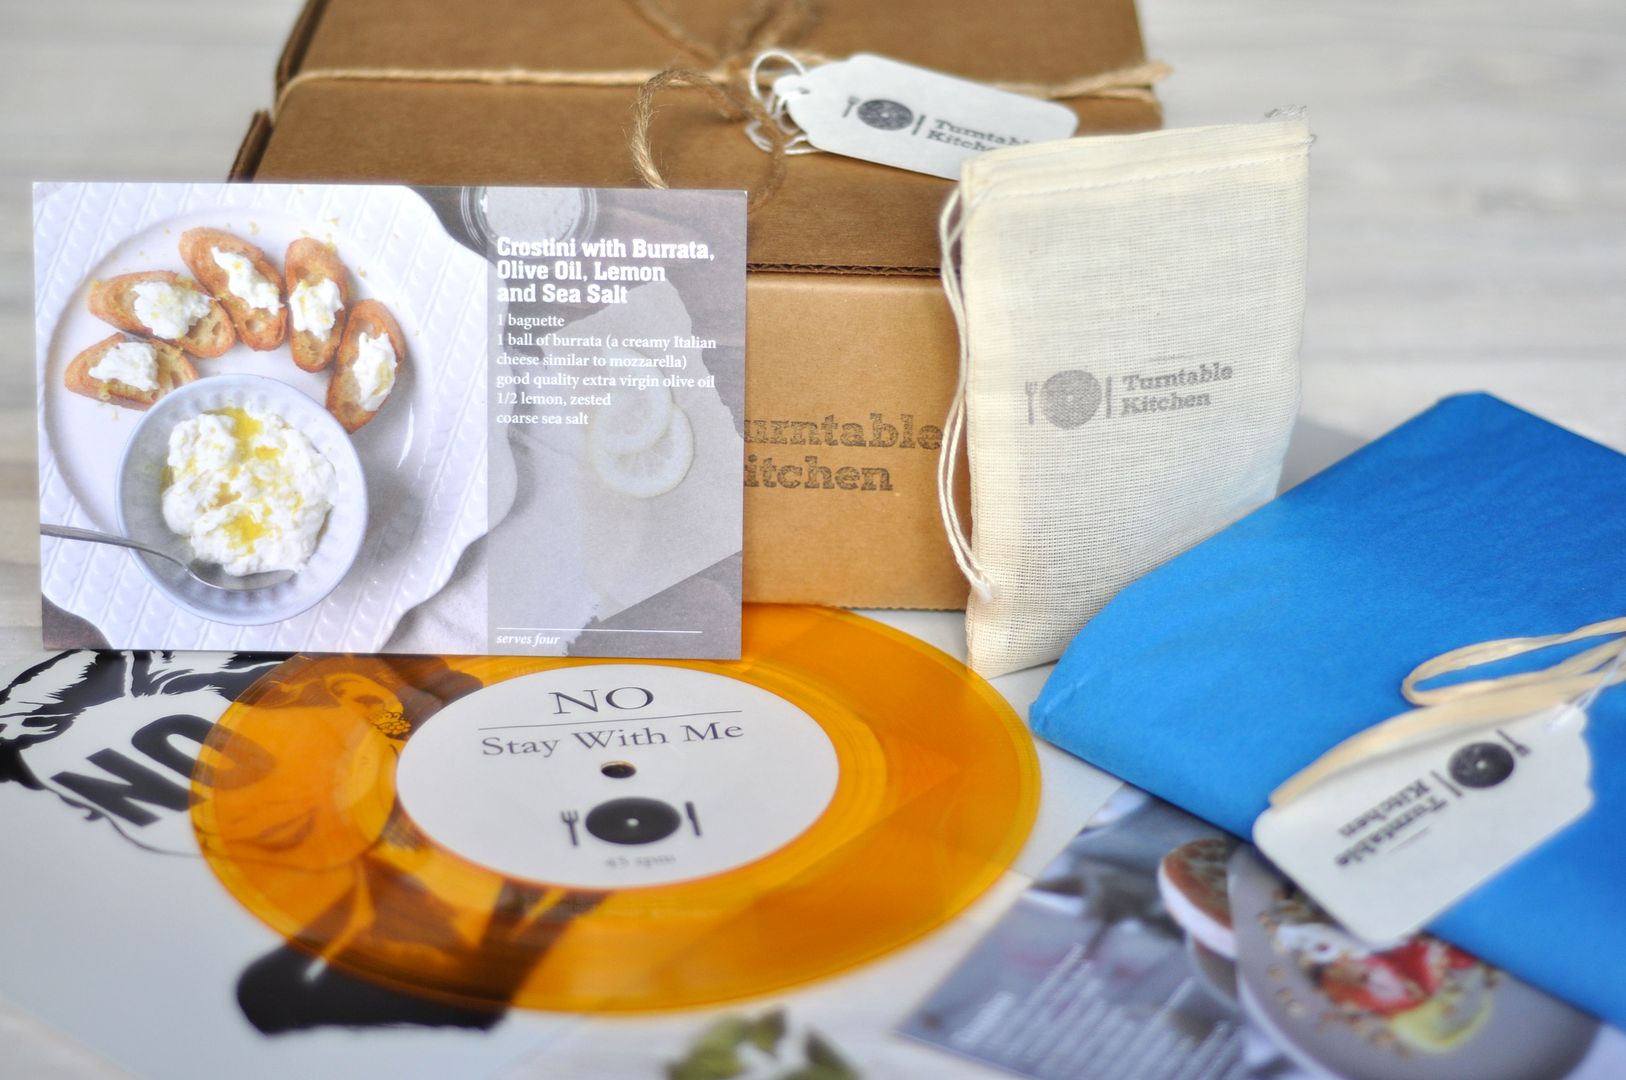 Best food subscription boxes that make great last minute gifts: Turntable Kitchen music and food pairing boxes | Cool Mom Eats holiday gift ideas